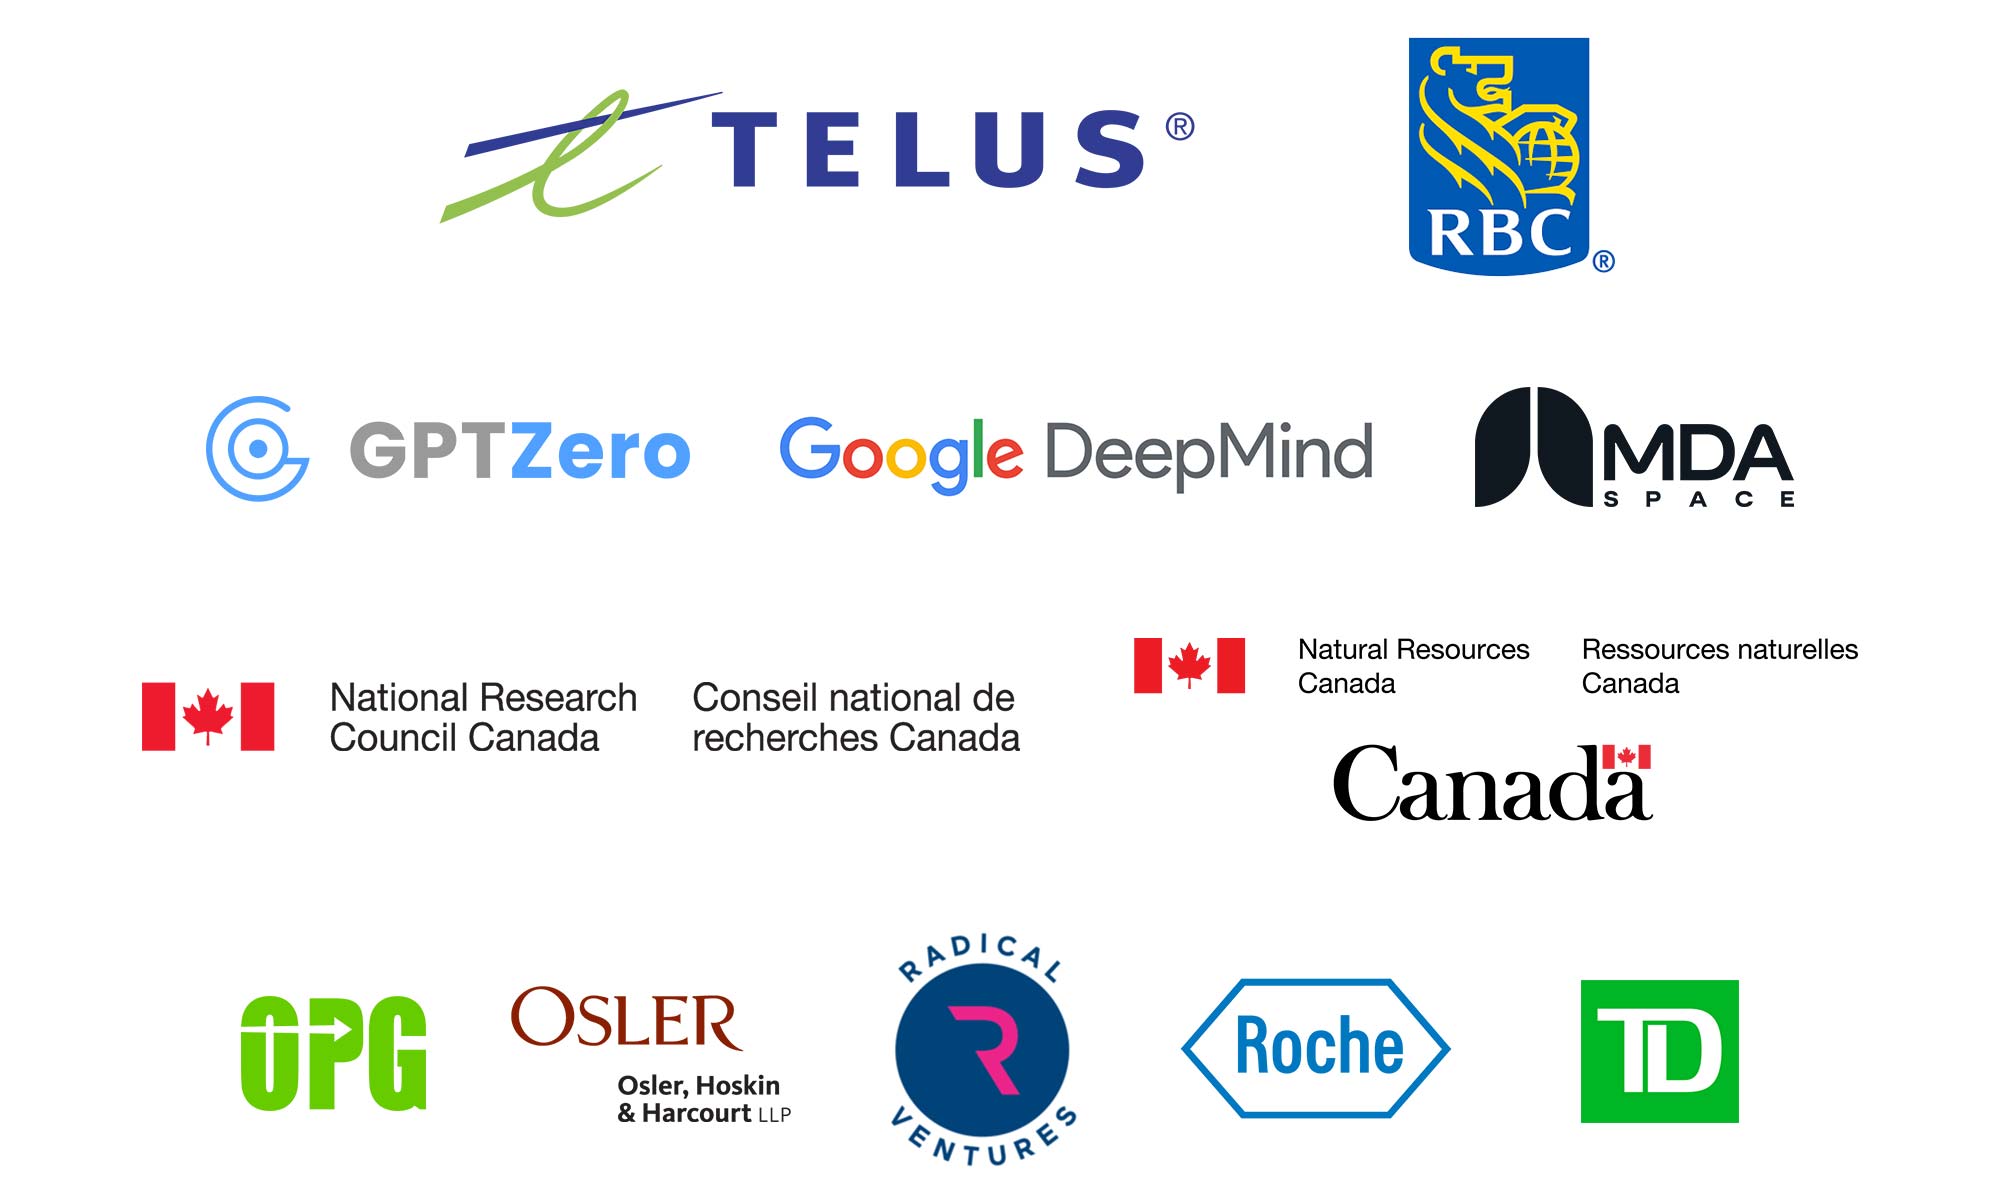 Telus, RBC, GPTZero, MDA Space, National Research Council Canada, Natural Resources Canada, OPG, Osler, Radical Ventures, Roche, TD